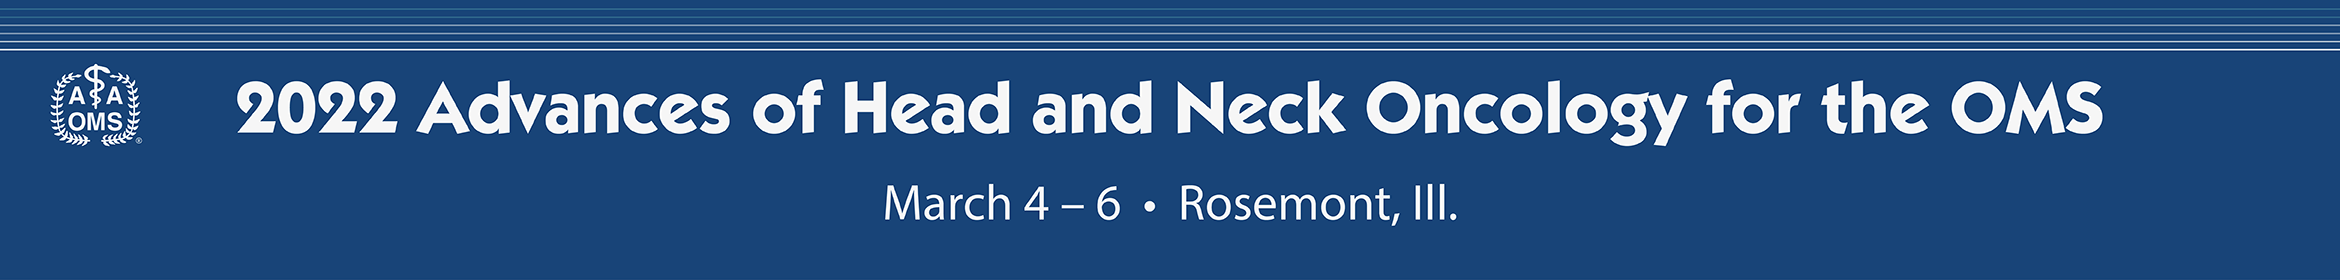 2022 Advances of Head and Neck Oncology  Main banner